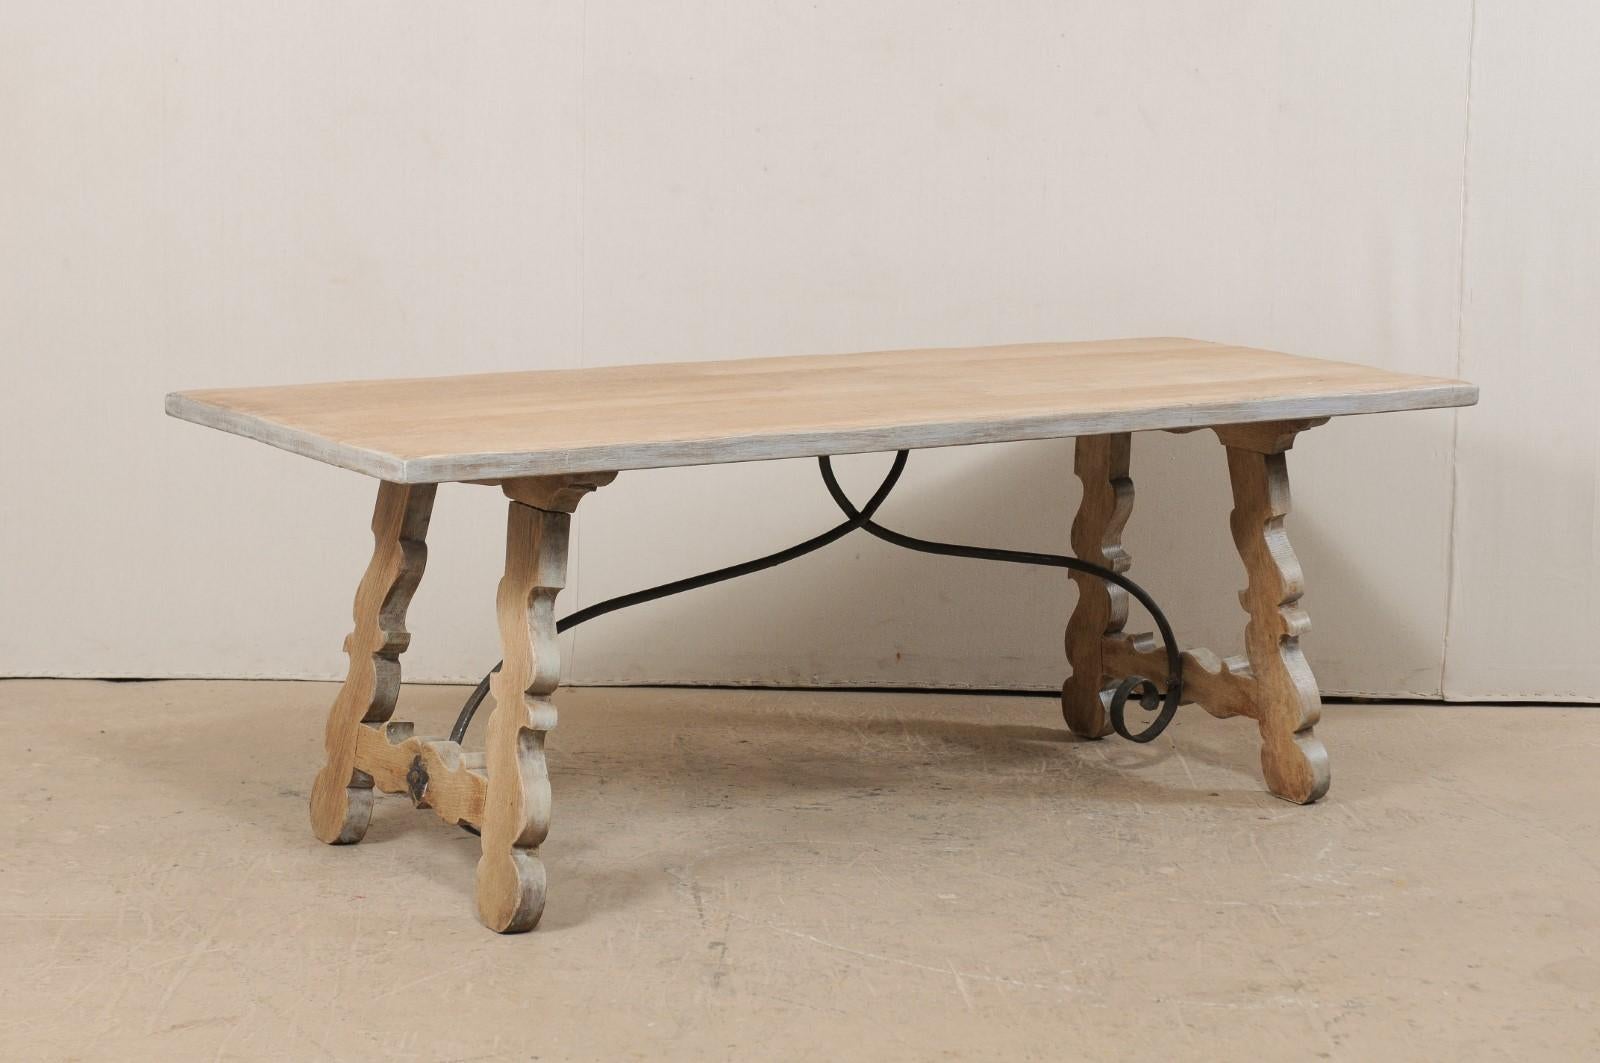 A French oak trestle table with iron stretcher from the mid-20th century. This vintage table from France features a rectangular shaped top, just over 7 feet in length, raised upon a pair of fluidly-carved trestle legs, which tops tilt slightly